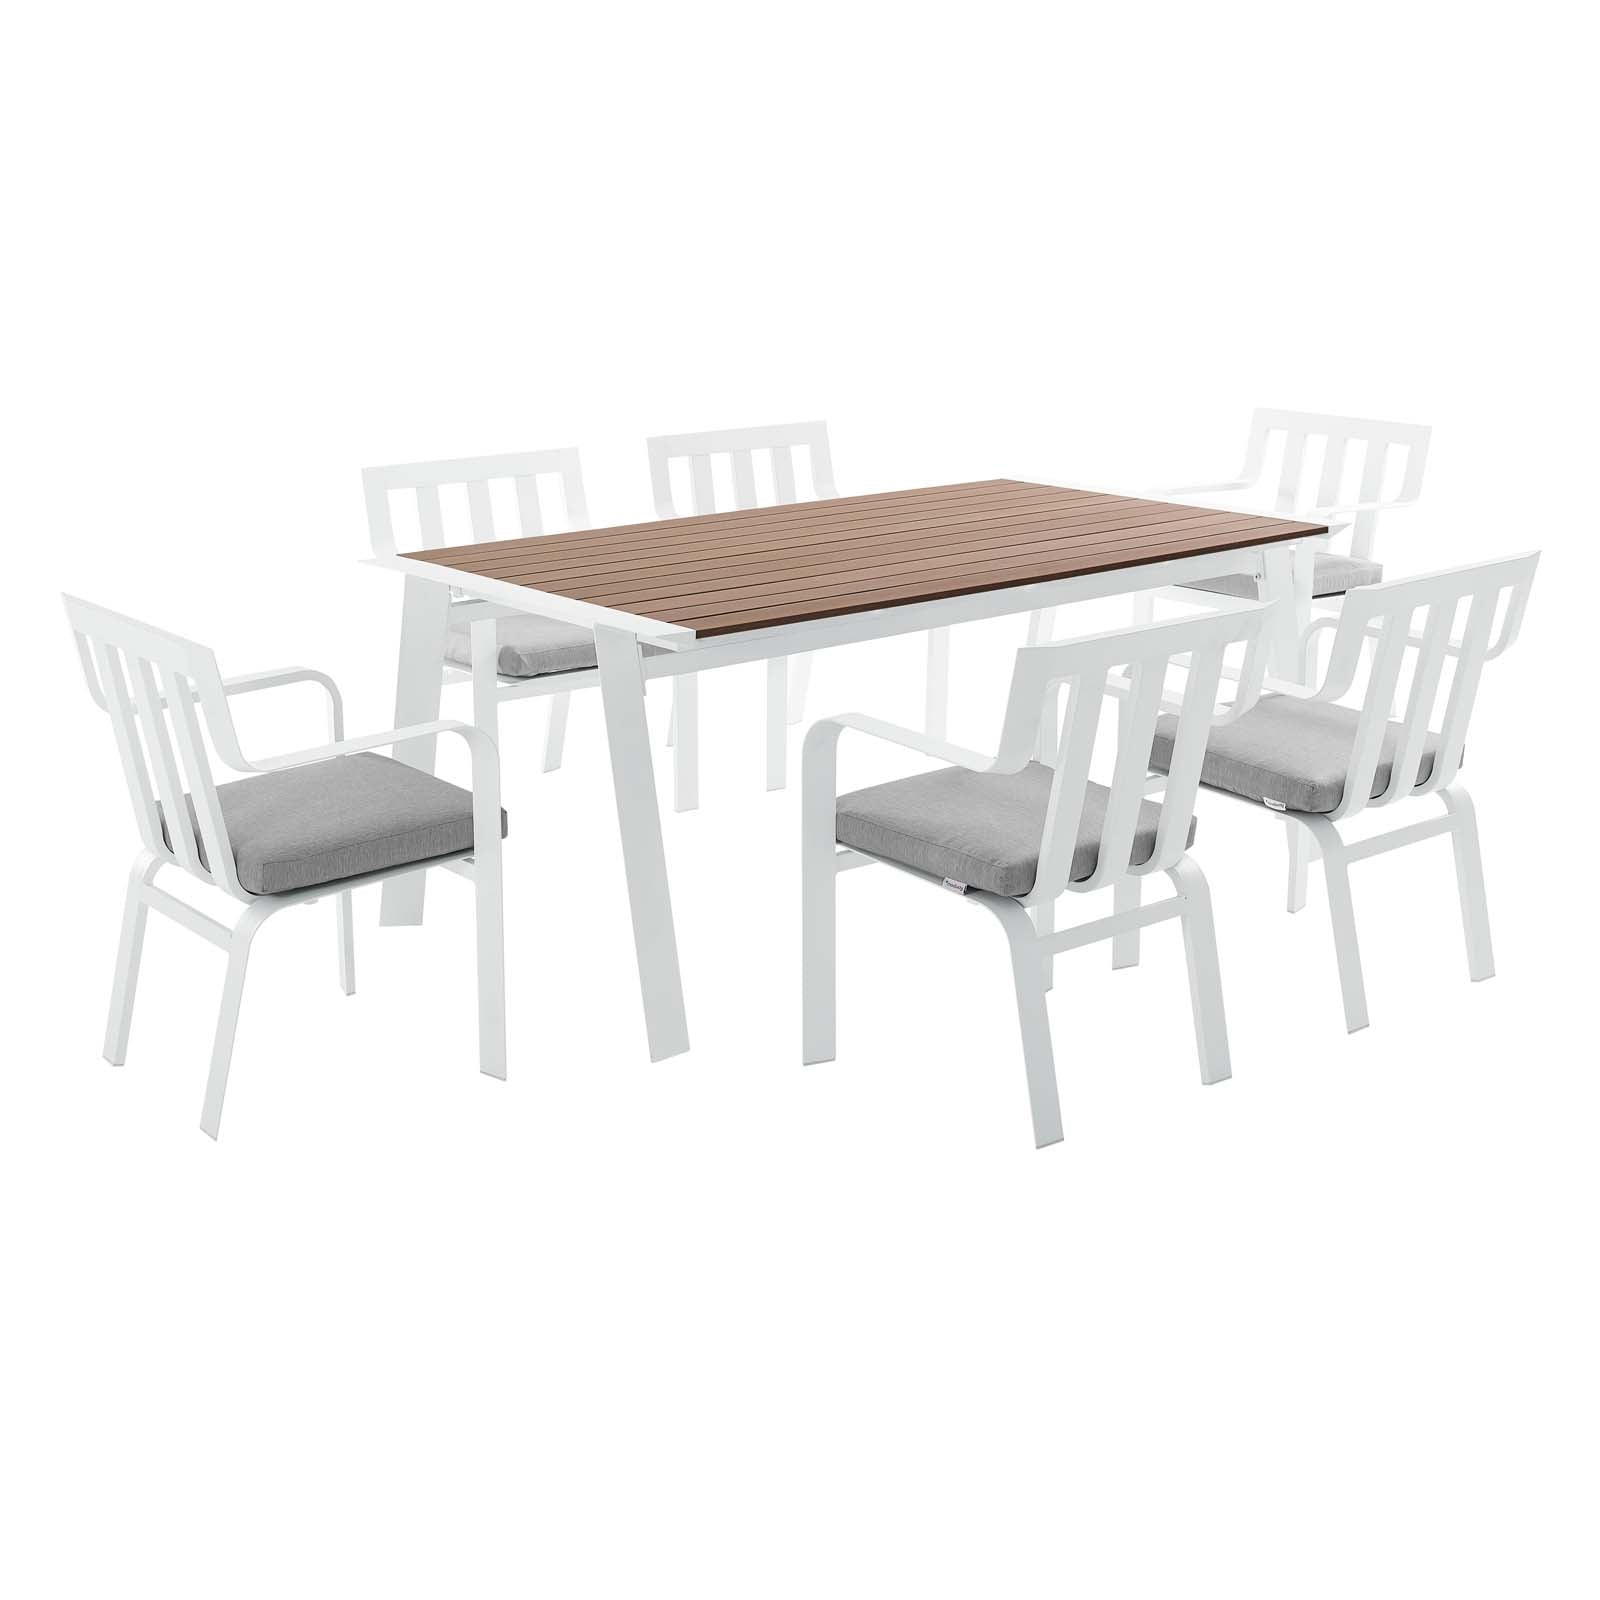 Modway Outdoor Dining Sets - Baxley 7 Piece Outdoor Patio Aluminum Dining Set White Gray